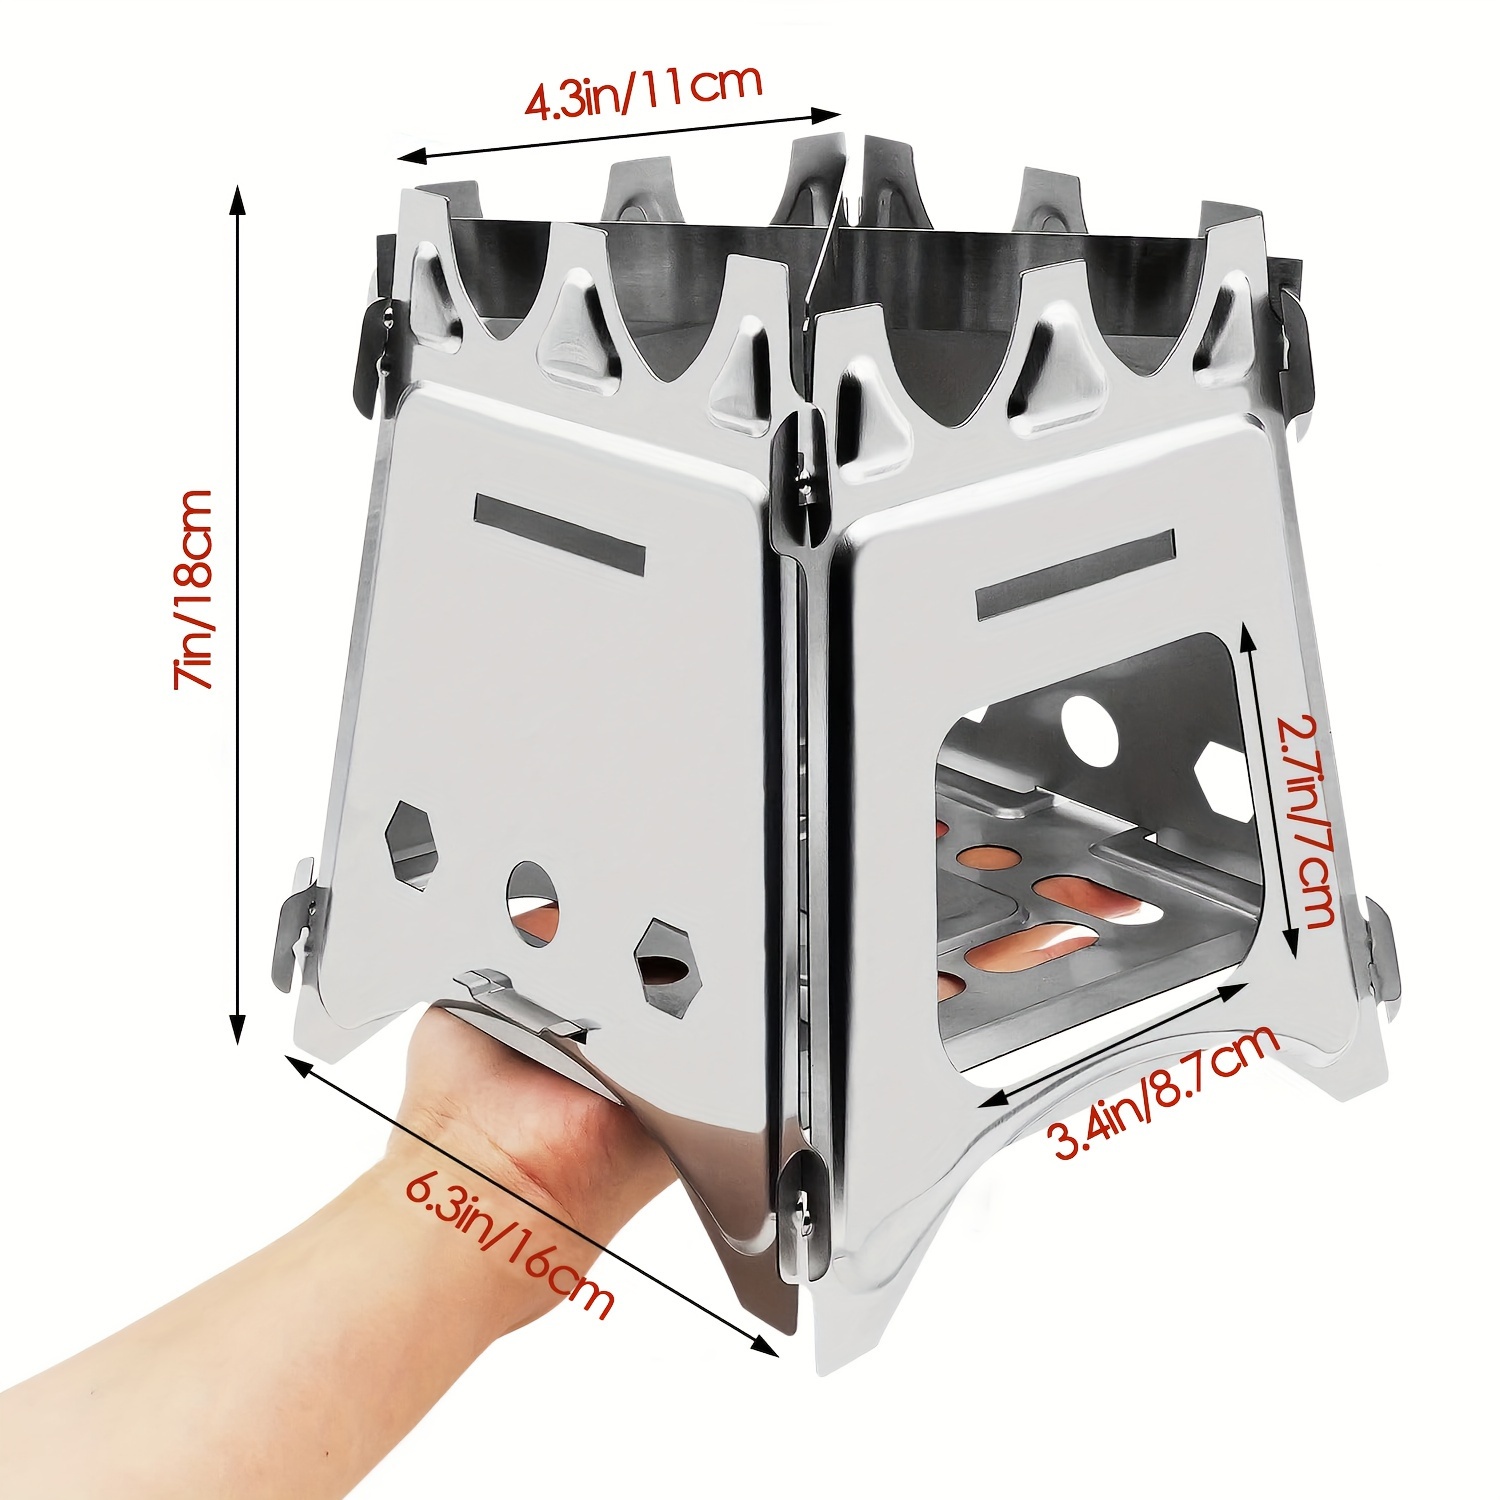 1pc charcoal grills portable camping stove portable wood stove for camping outdoor stainless steel folding grill sturdy and durable grill used for outdoor bbq outdoor hiking camping bbq accessories grill accessories